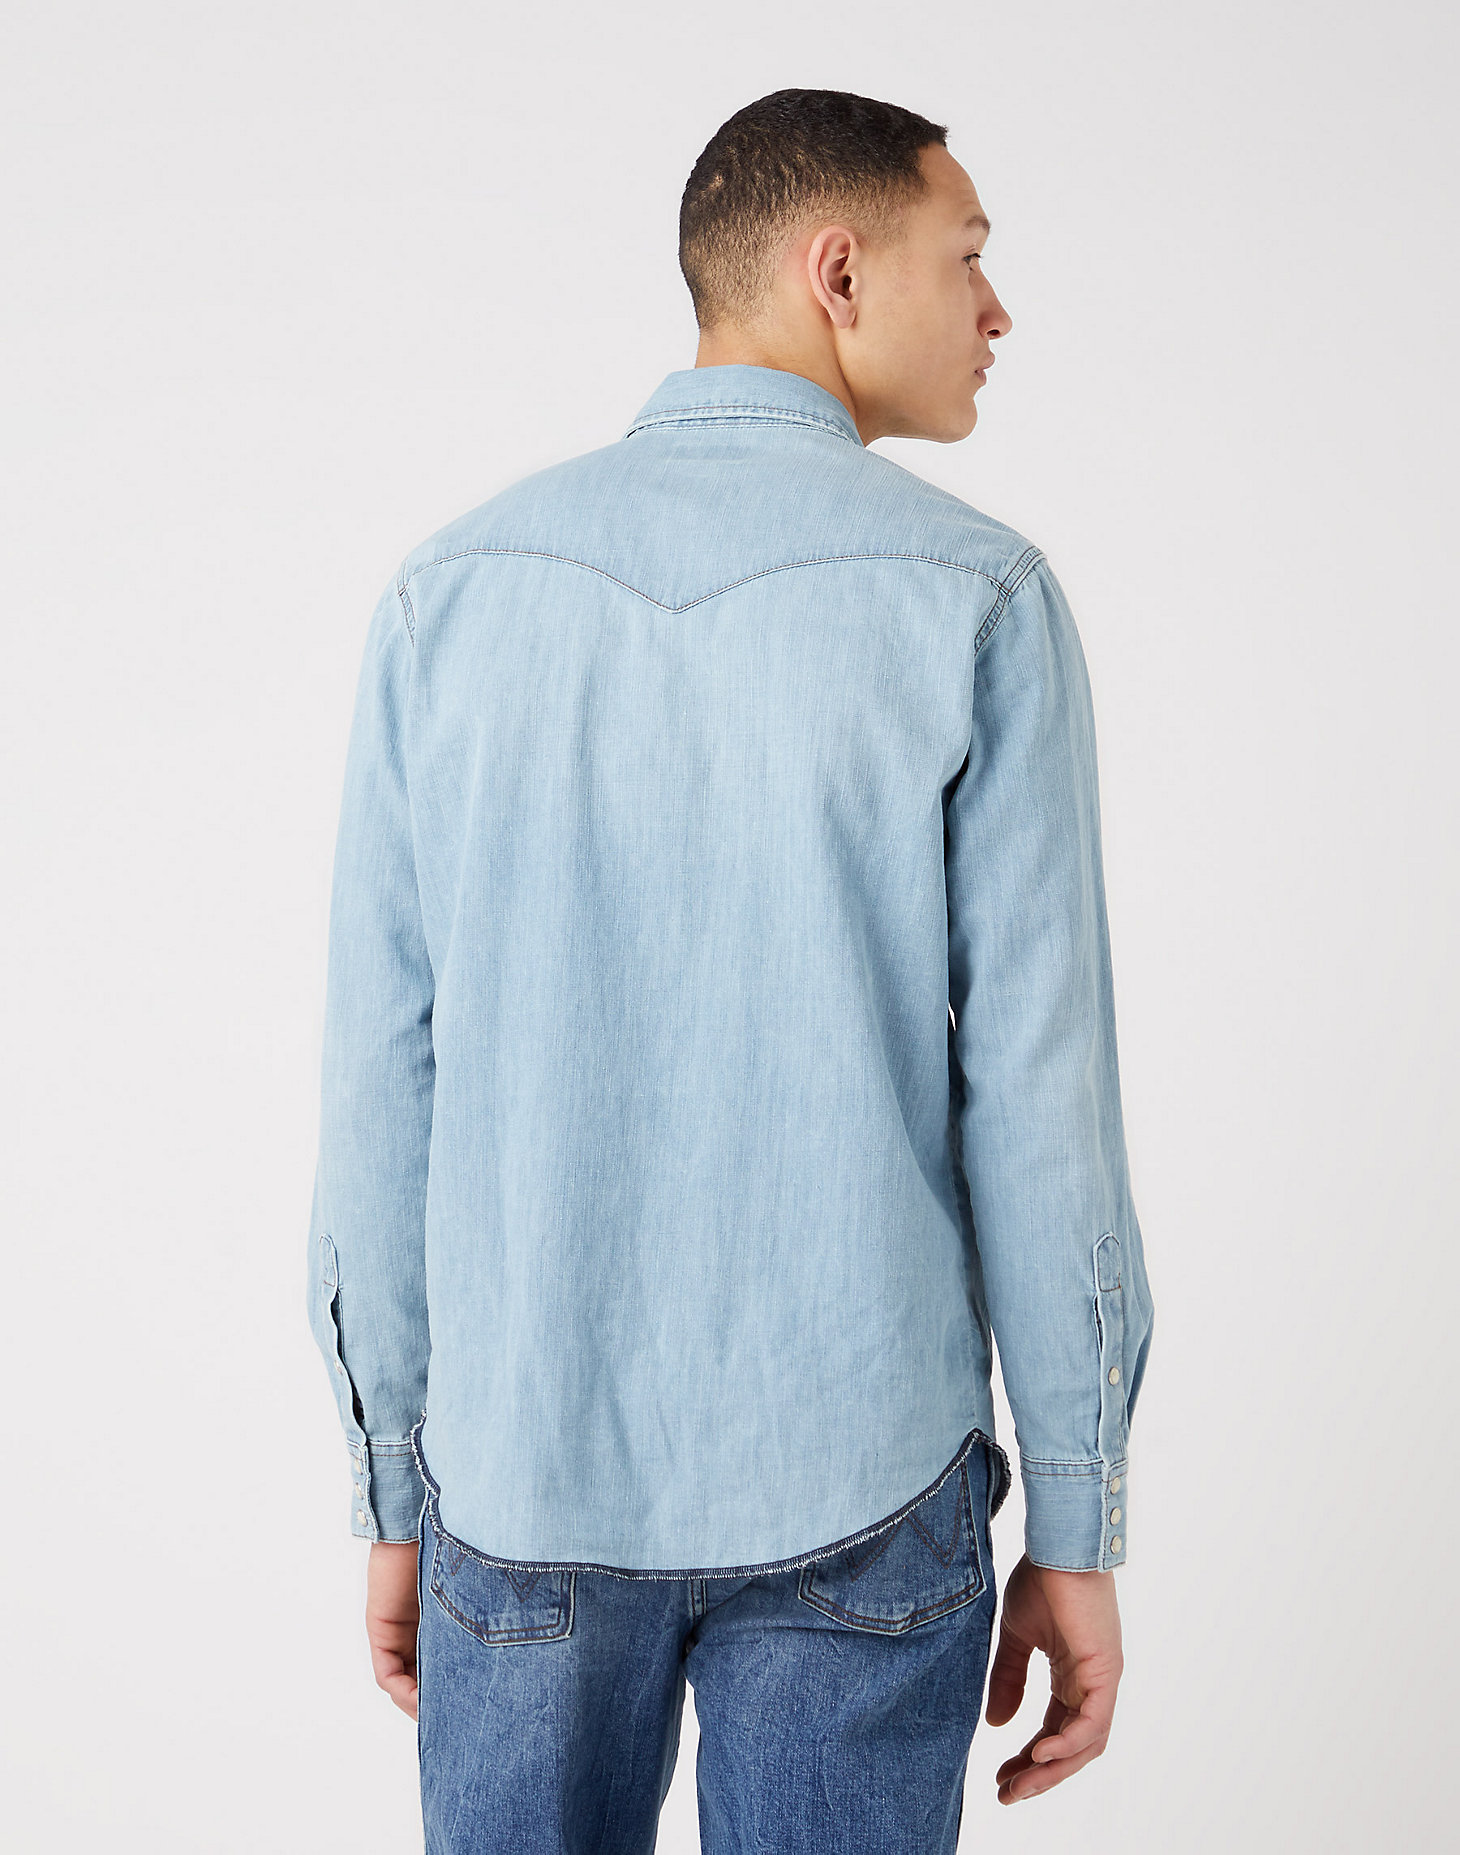 Long Sleeve Workshirt in Icy Blue alternative view 2